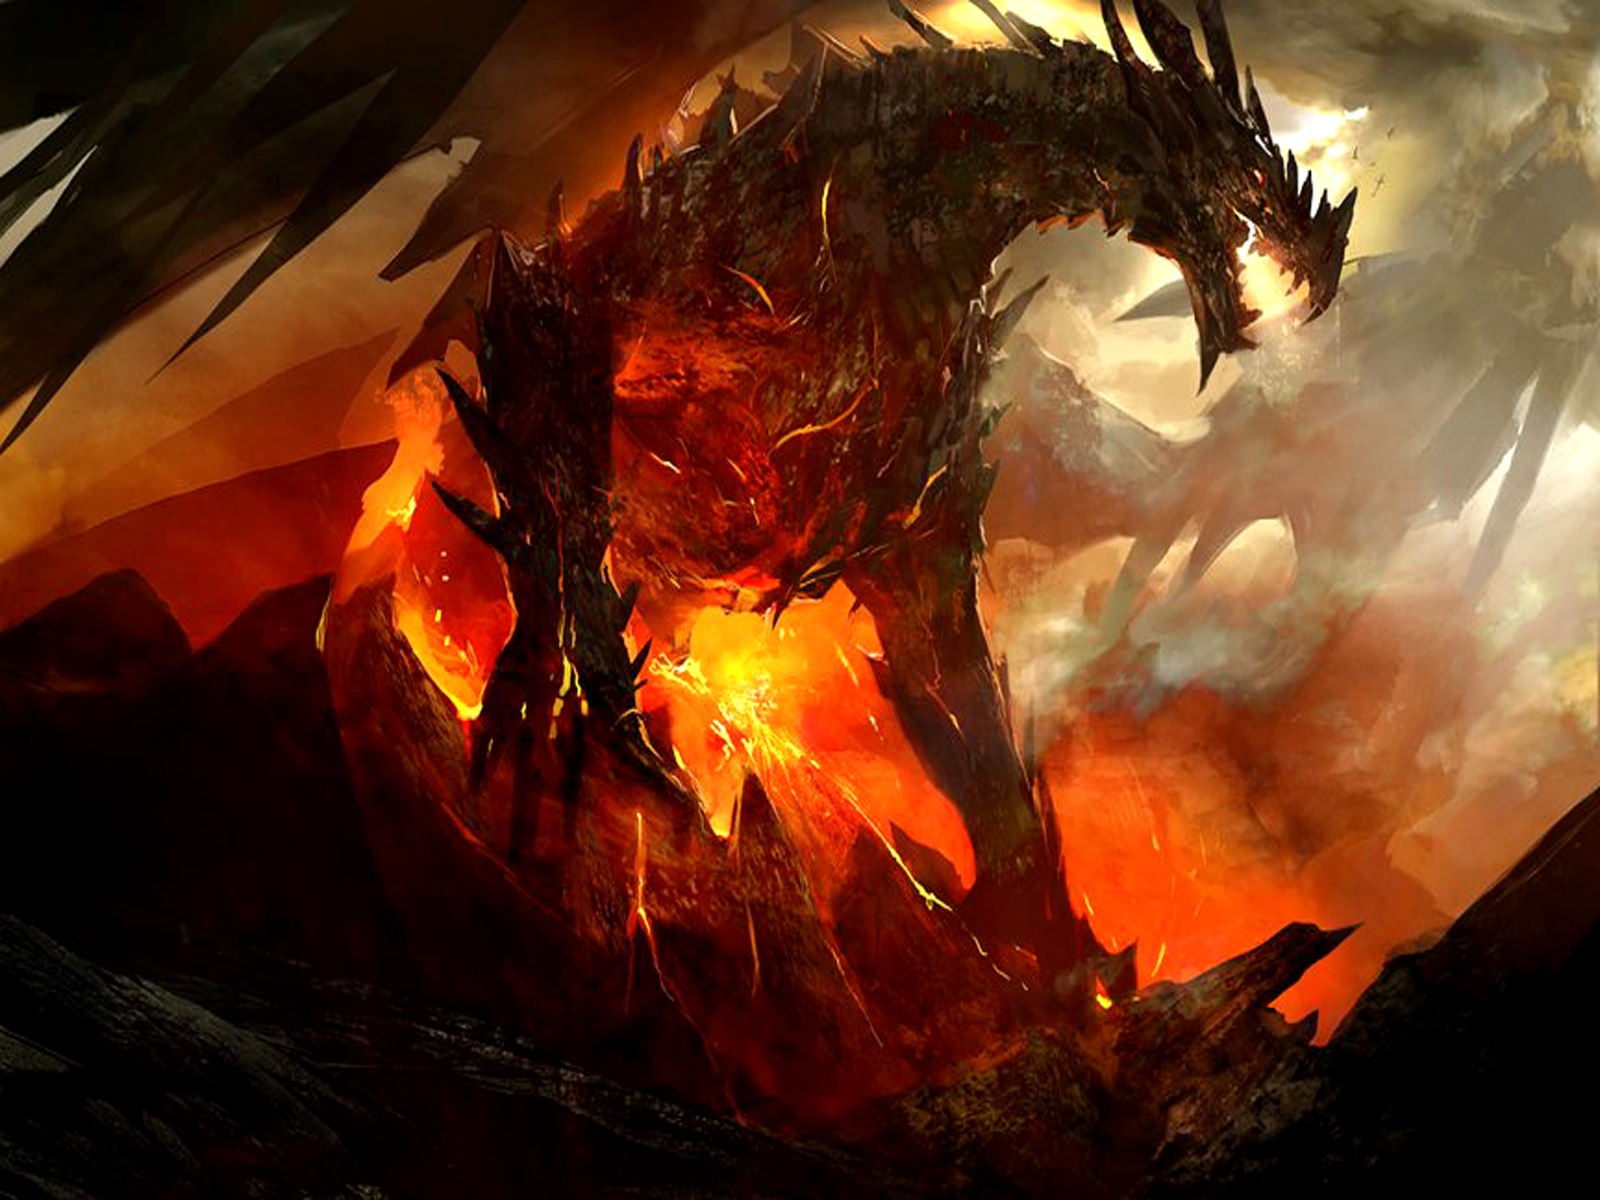 Dragon HD Wallpapers Dragon Pictures Cool Wallpapers